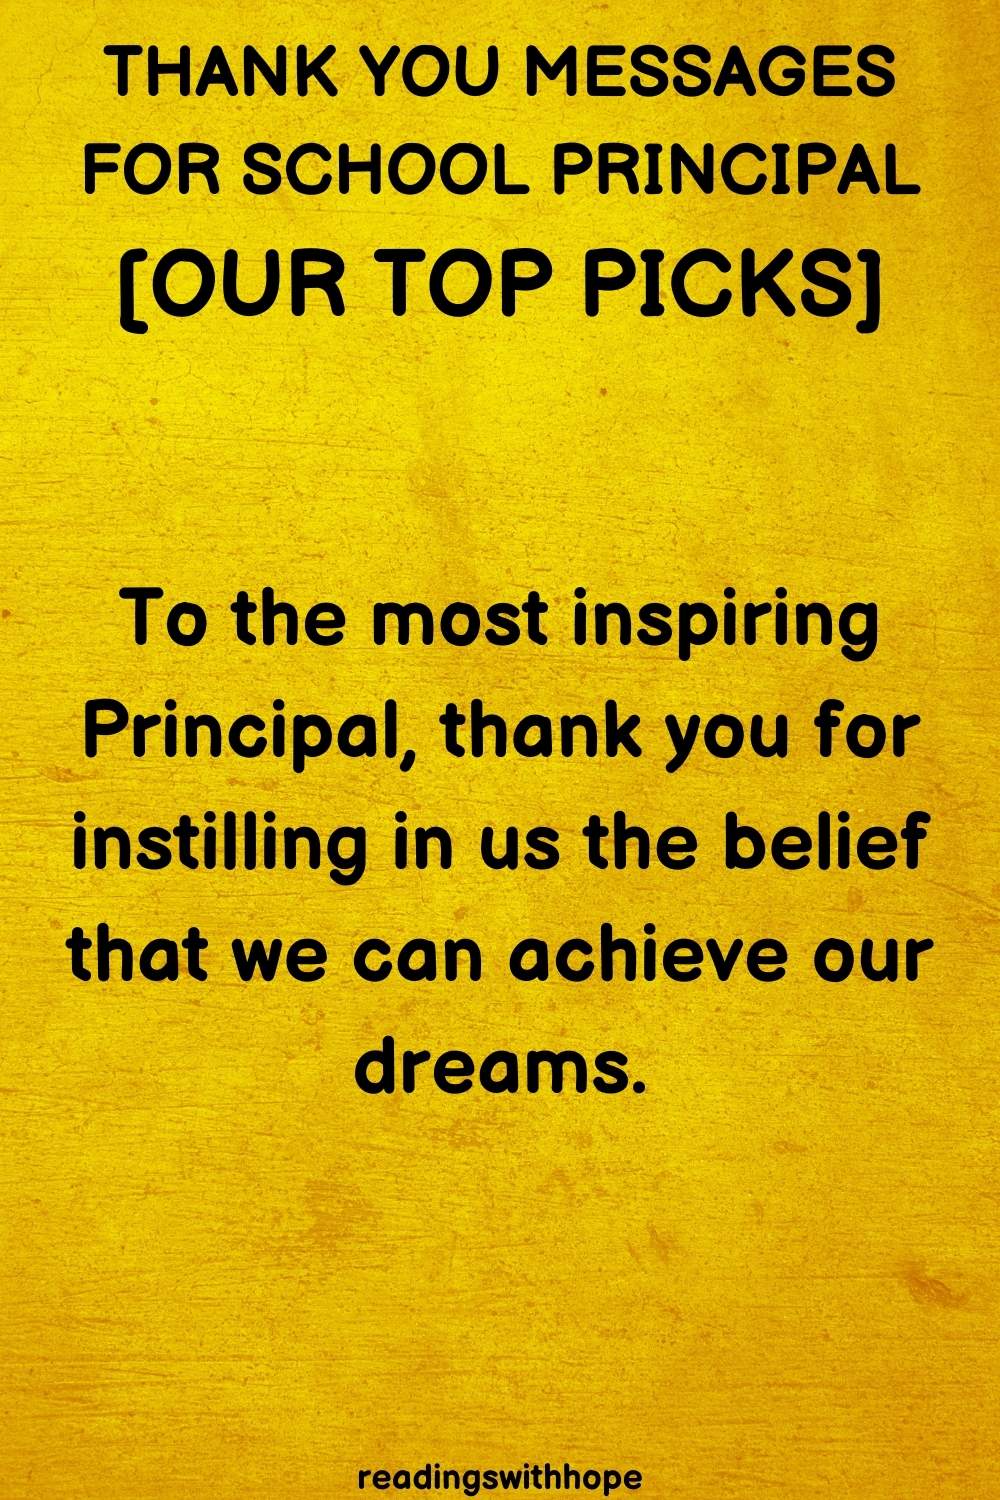 Thank You Message for School Principal